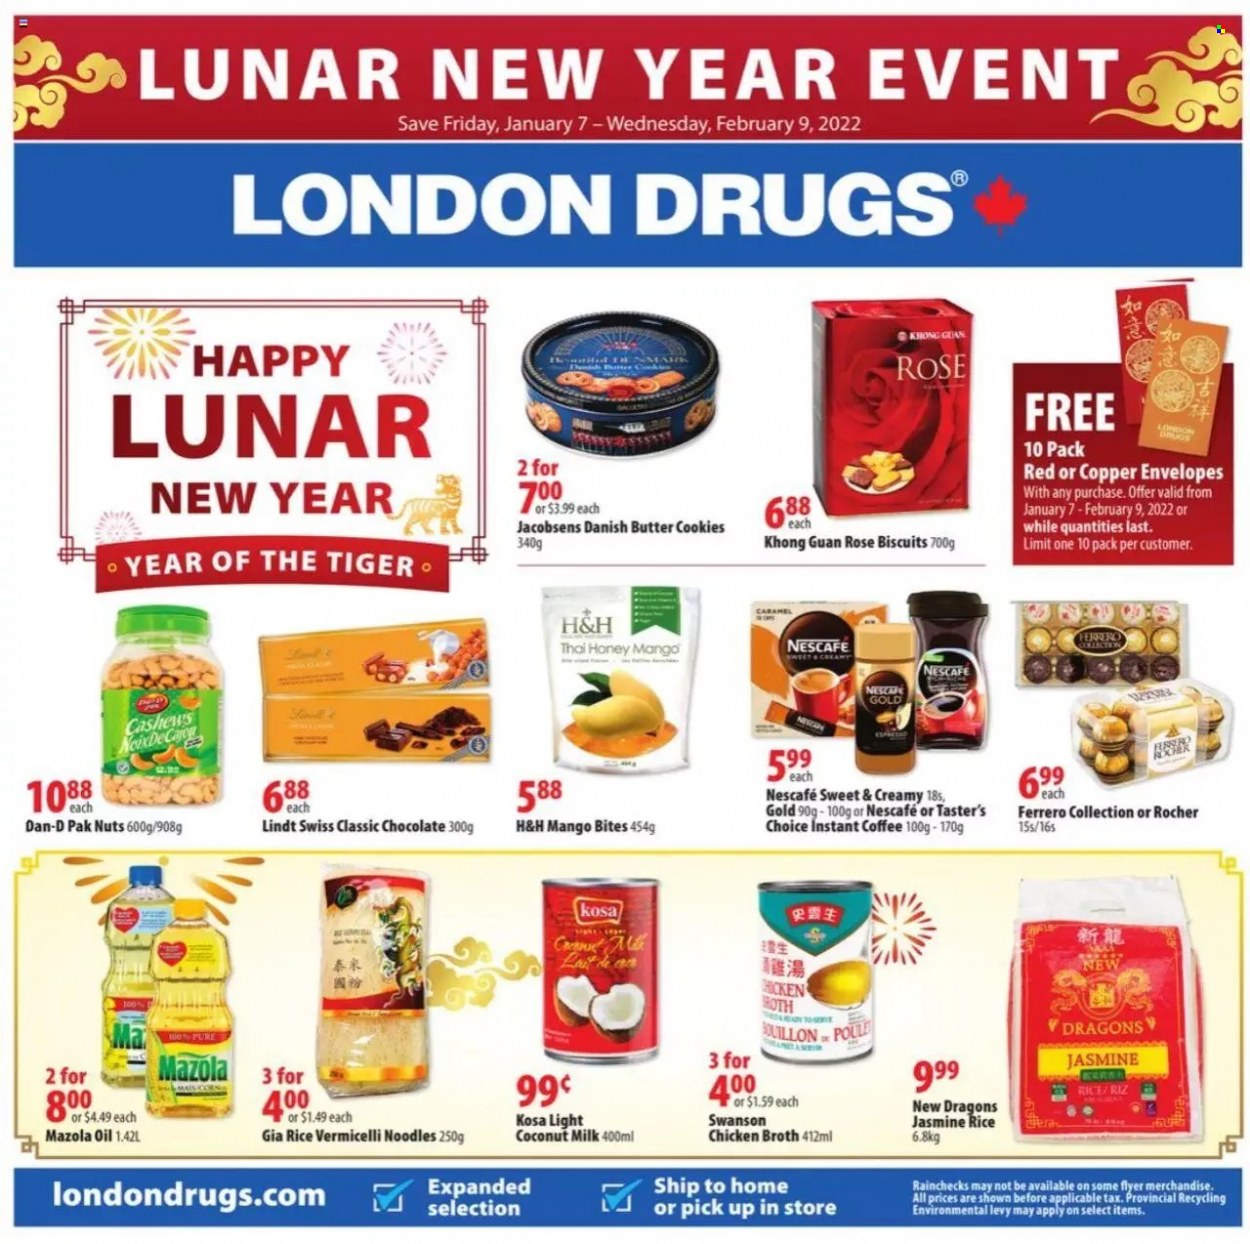 thumbnail - London Drugs Flyer - January 07, 2022 - January 09, 2022 - Sales products - cookies, chocolate, butter cookies, biscuit, chicken broth, broth, coconut milk, mango, Dan-D Pak, rice, jasmine rice, rice vermicelli, noodles, oil, honey, cashews, instant coffee, wine, rosé wine, envelope, rose, Lindt, Ferrero Rocher, Nescafé. Page 1.